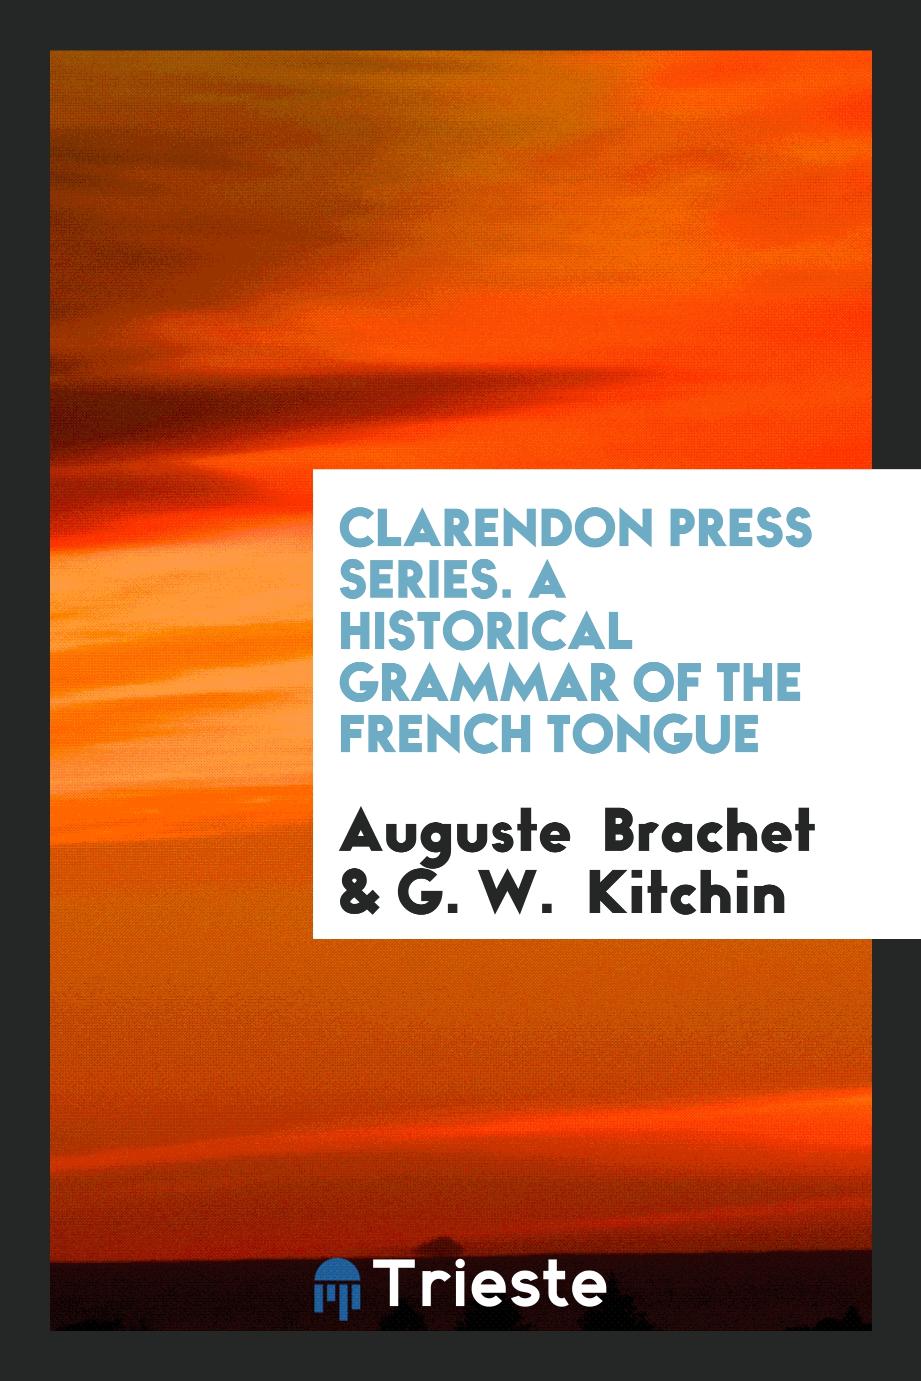 Clarendon Press Series. A Historical Grammar of the French Tongue